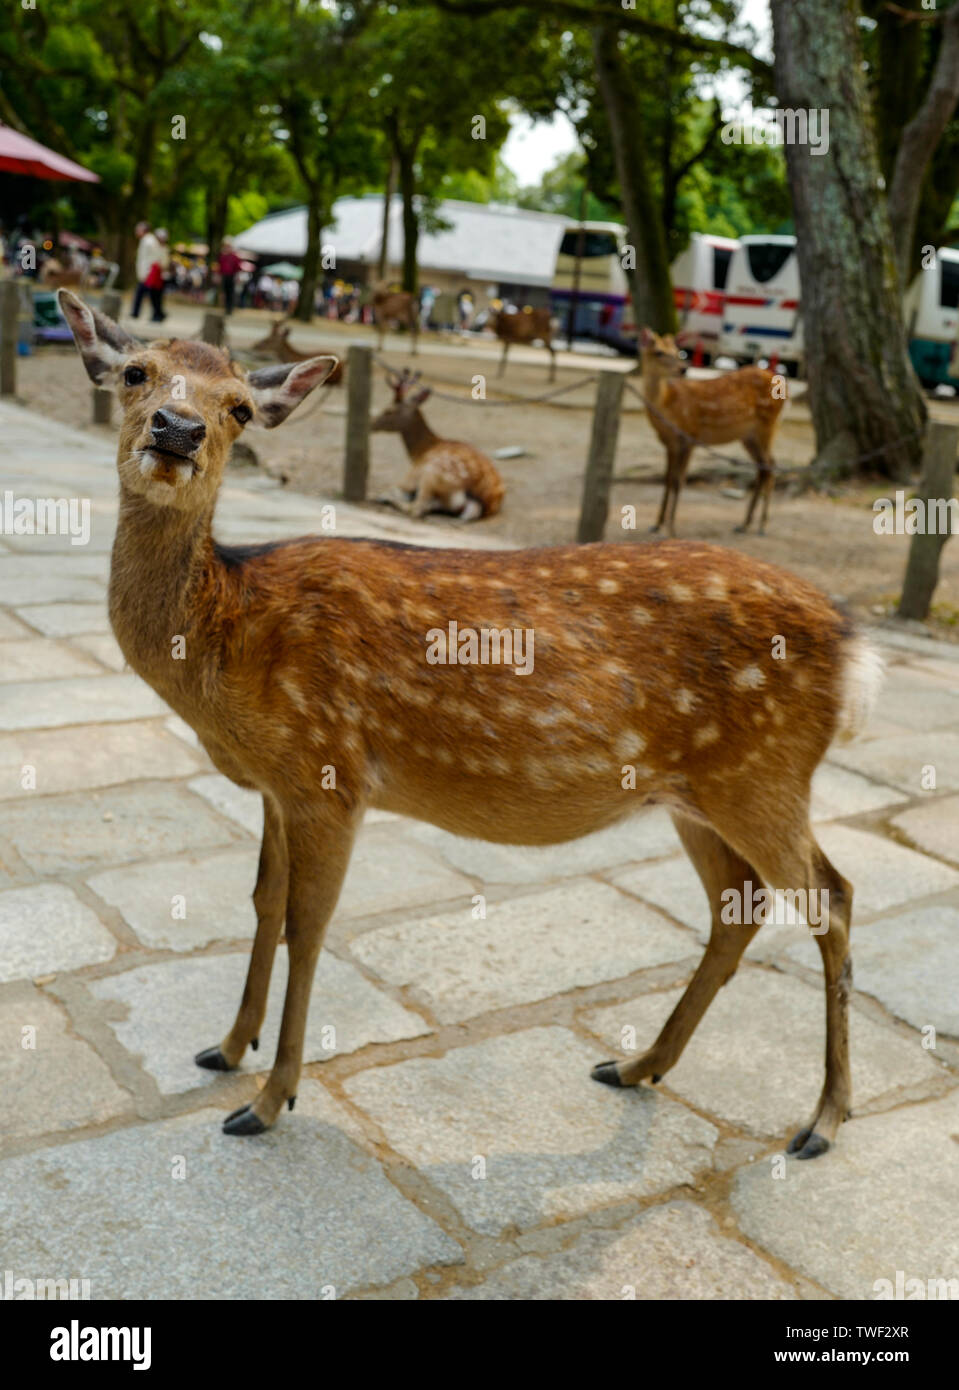 Kyoto, Japan, 31st, May, 2017. A lovely deer is walking on the ground in Nara Park. Nara Park is a public park located in the city of Nara, Japan Stock Photo